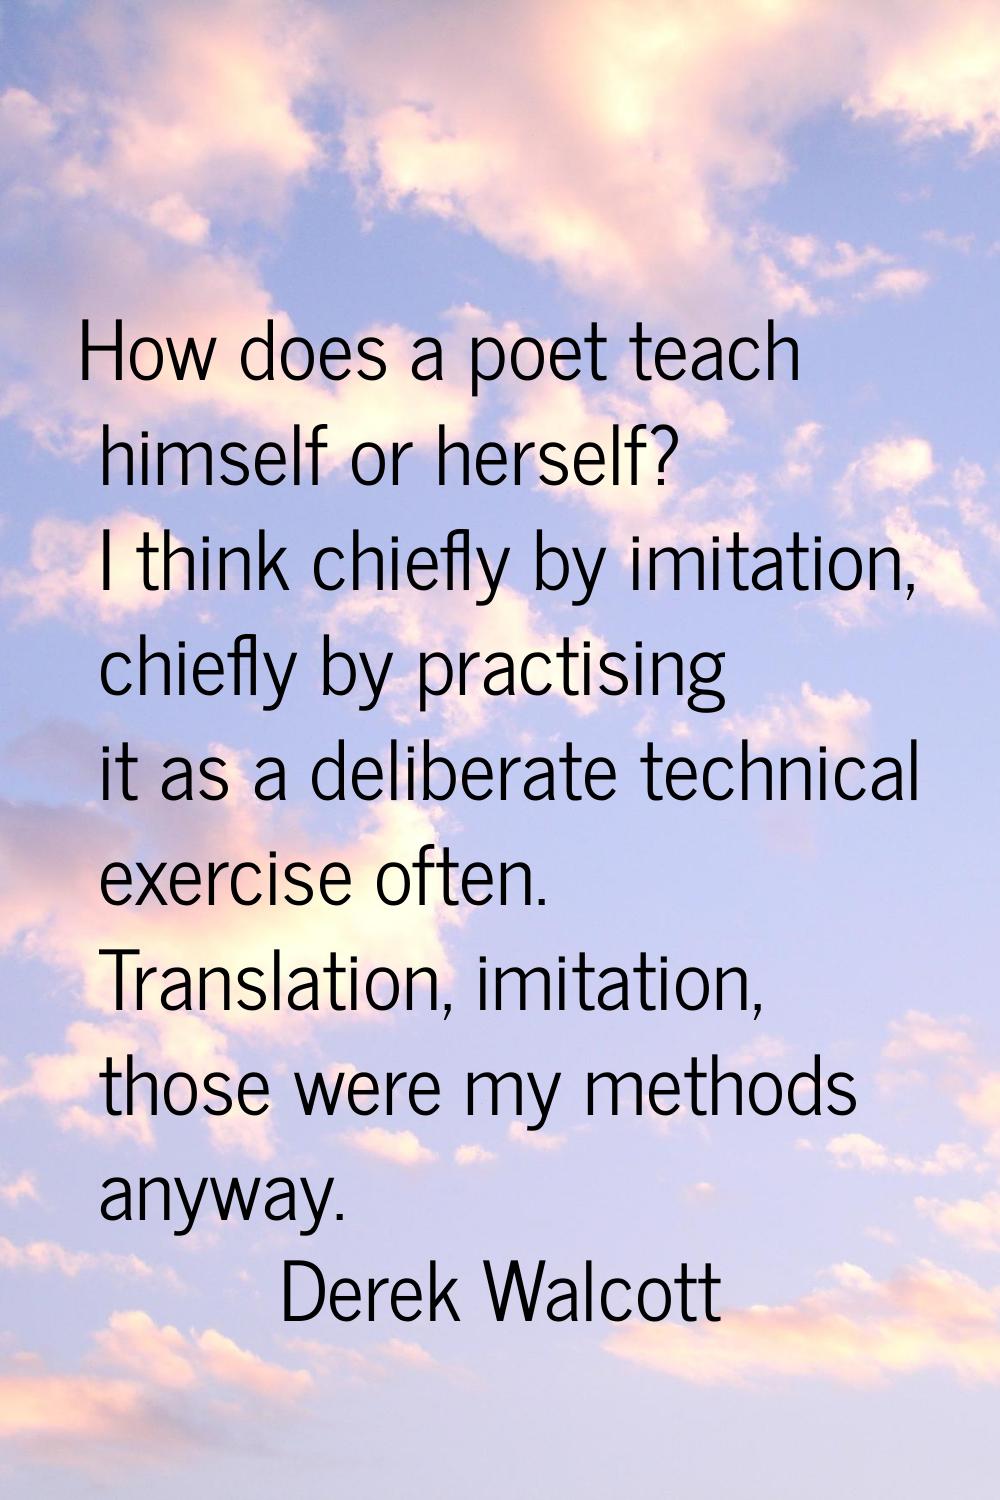 How does a poet teach himself or herself? I think chiefly by imitation, chiefly by practising it as